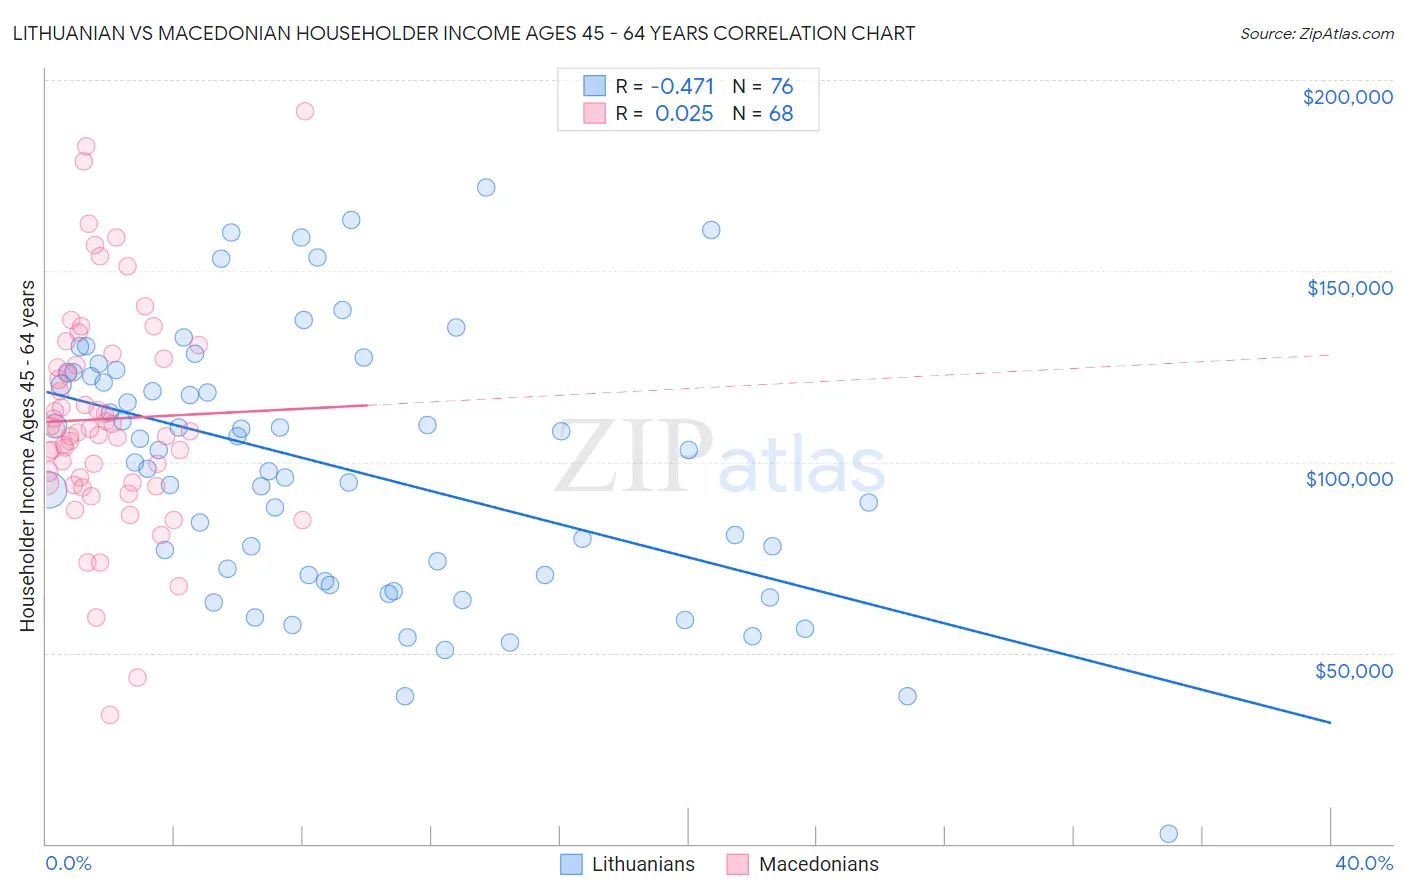 Lithuanian vs Macedonian Householder Income Ages 45 - 64 years